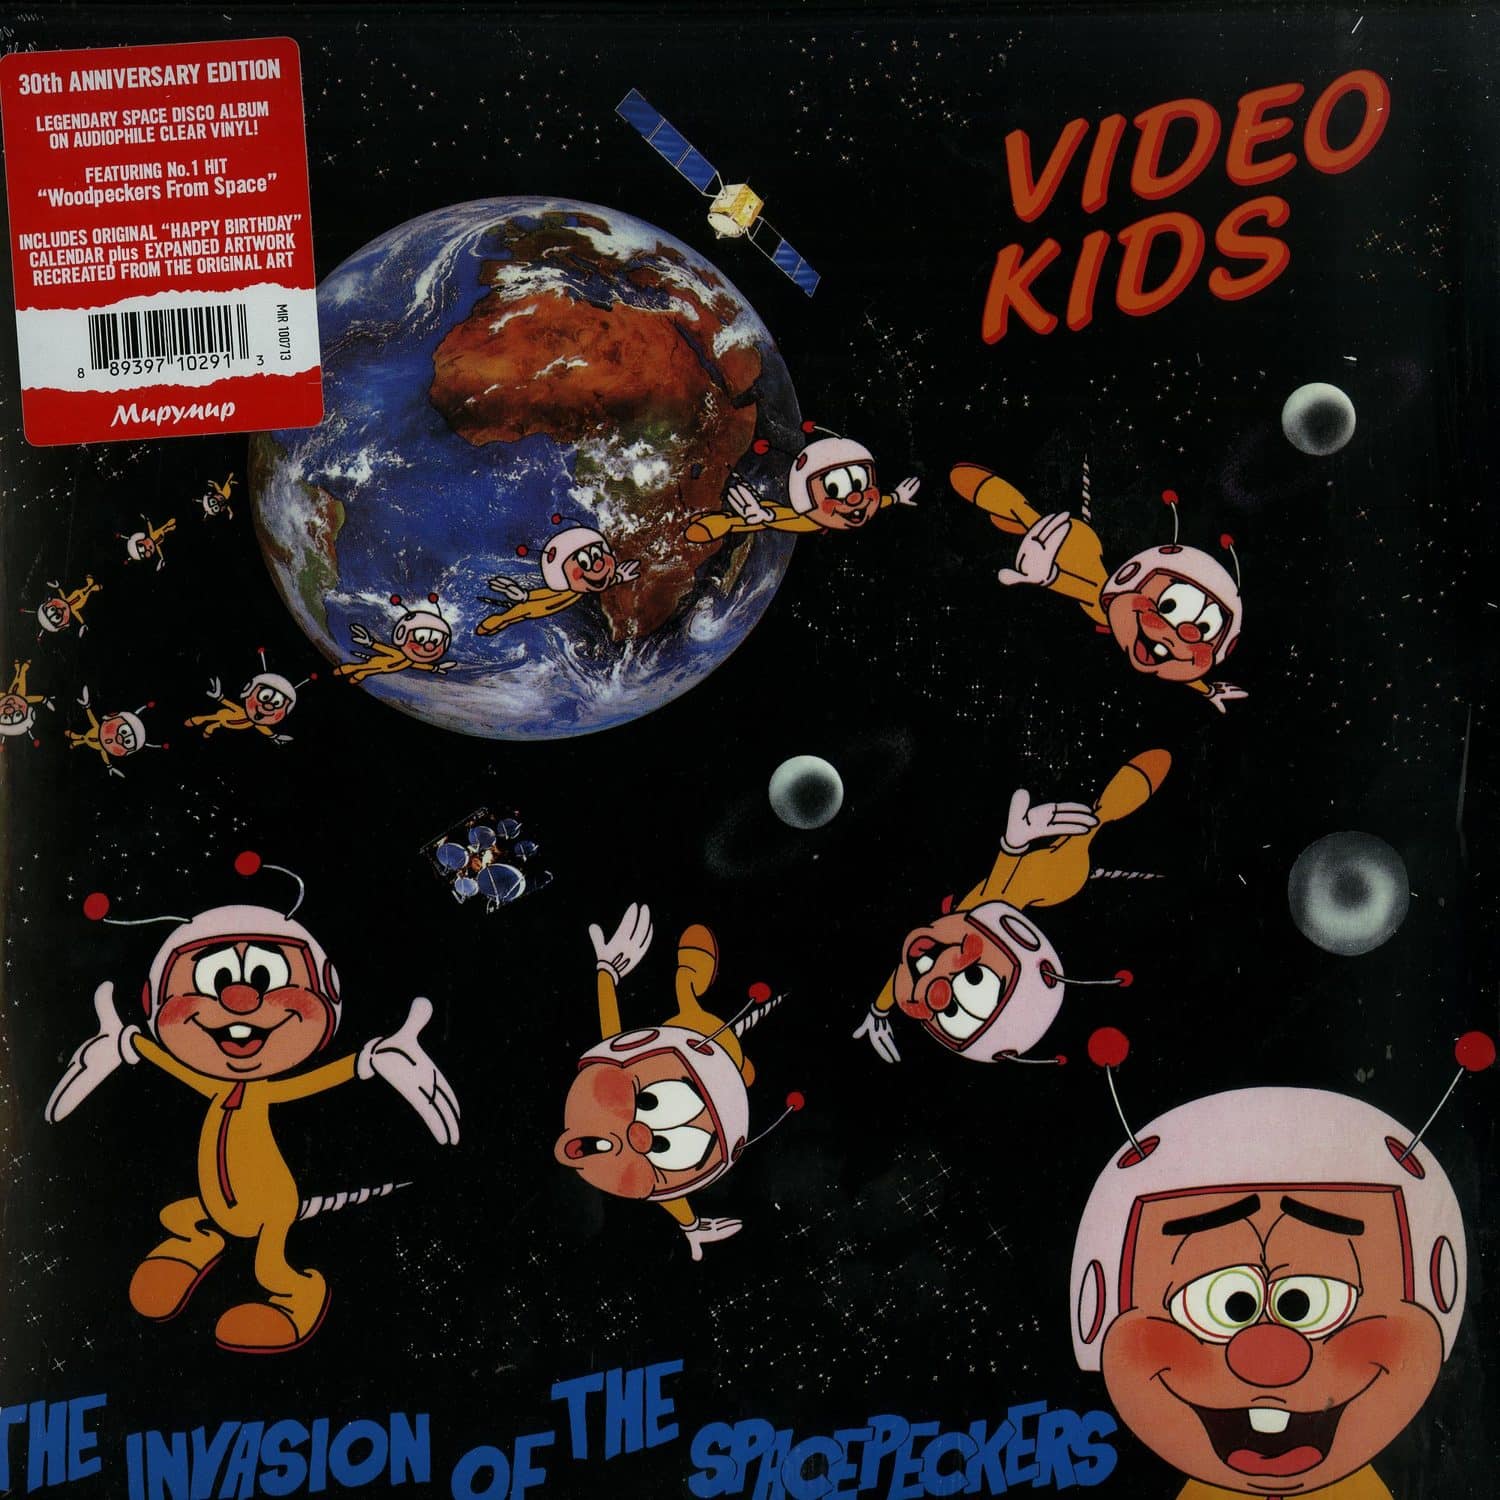 Video Kids - THE INVASION OF THE SPACEPECKERS 